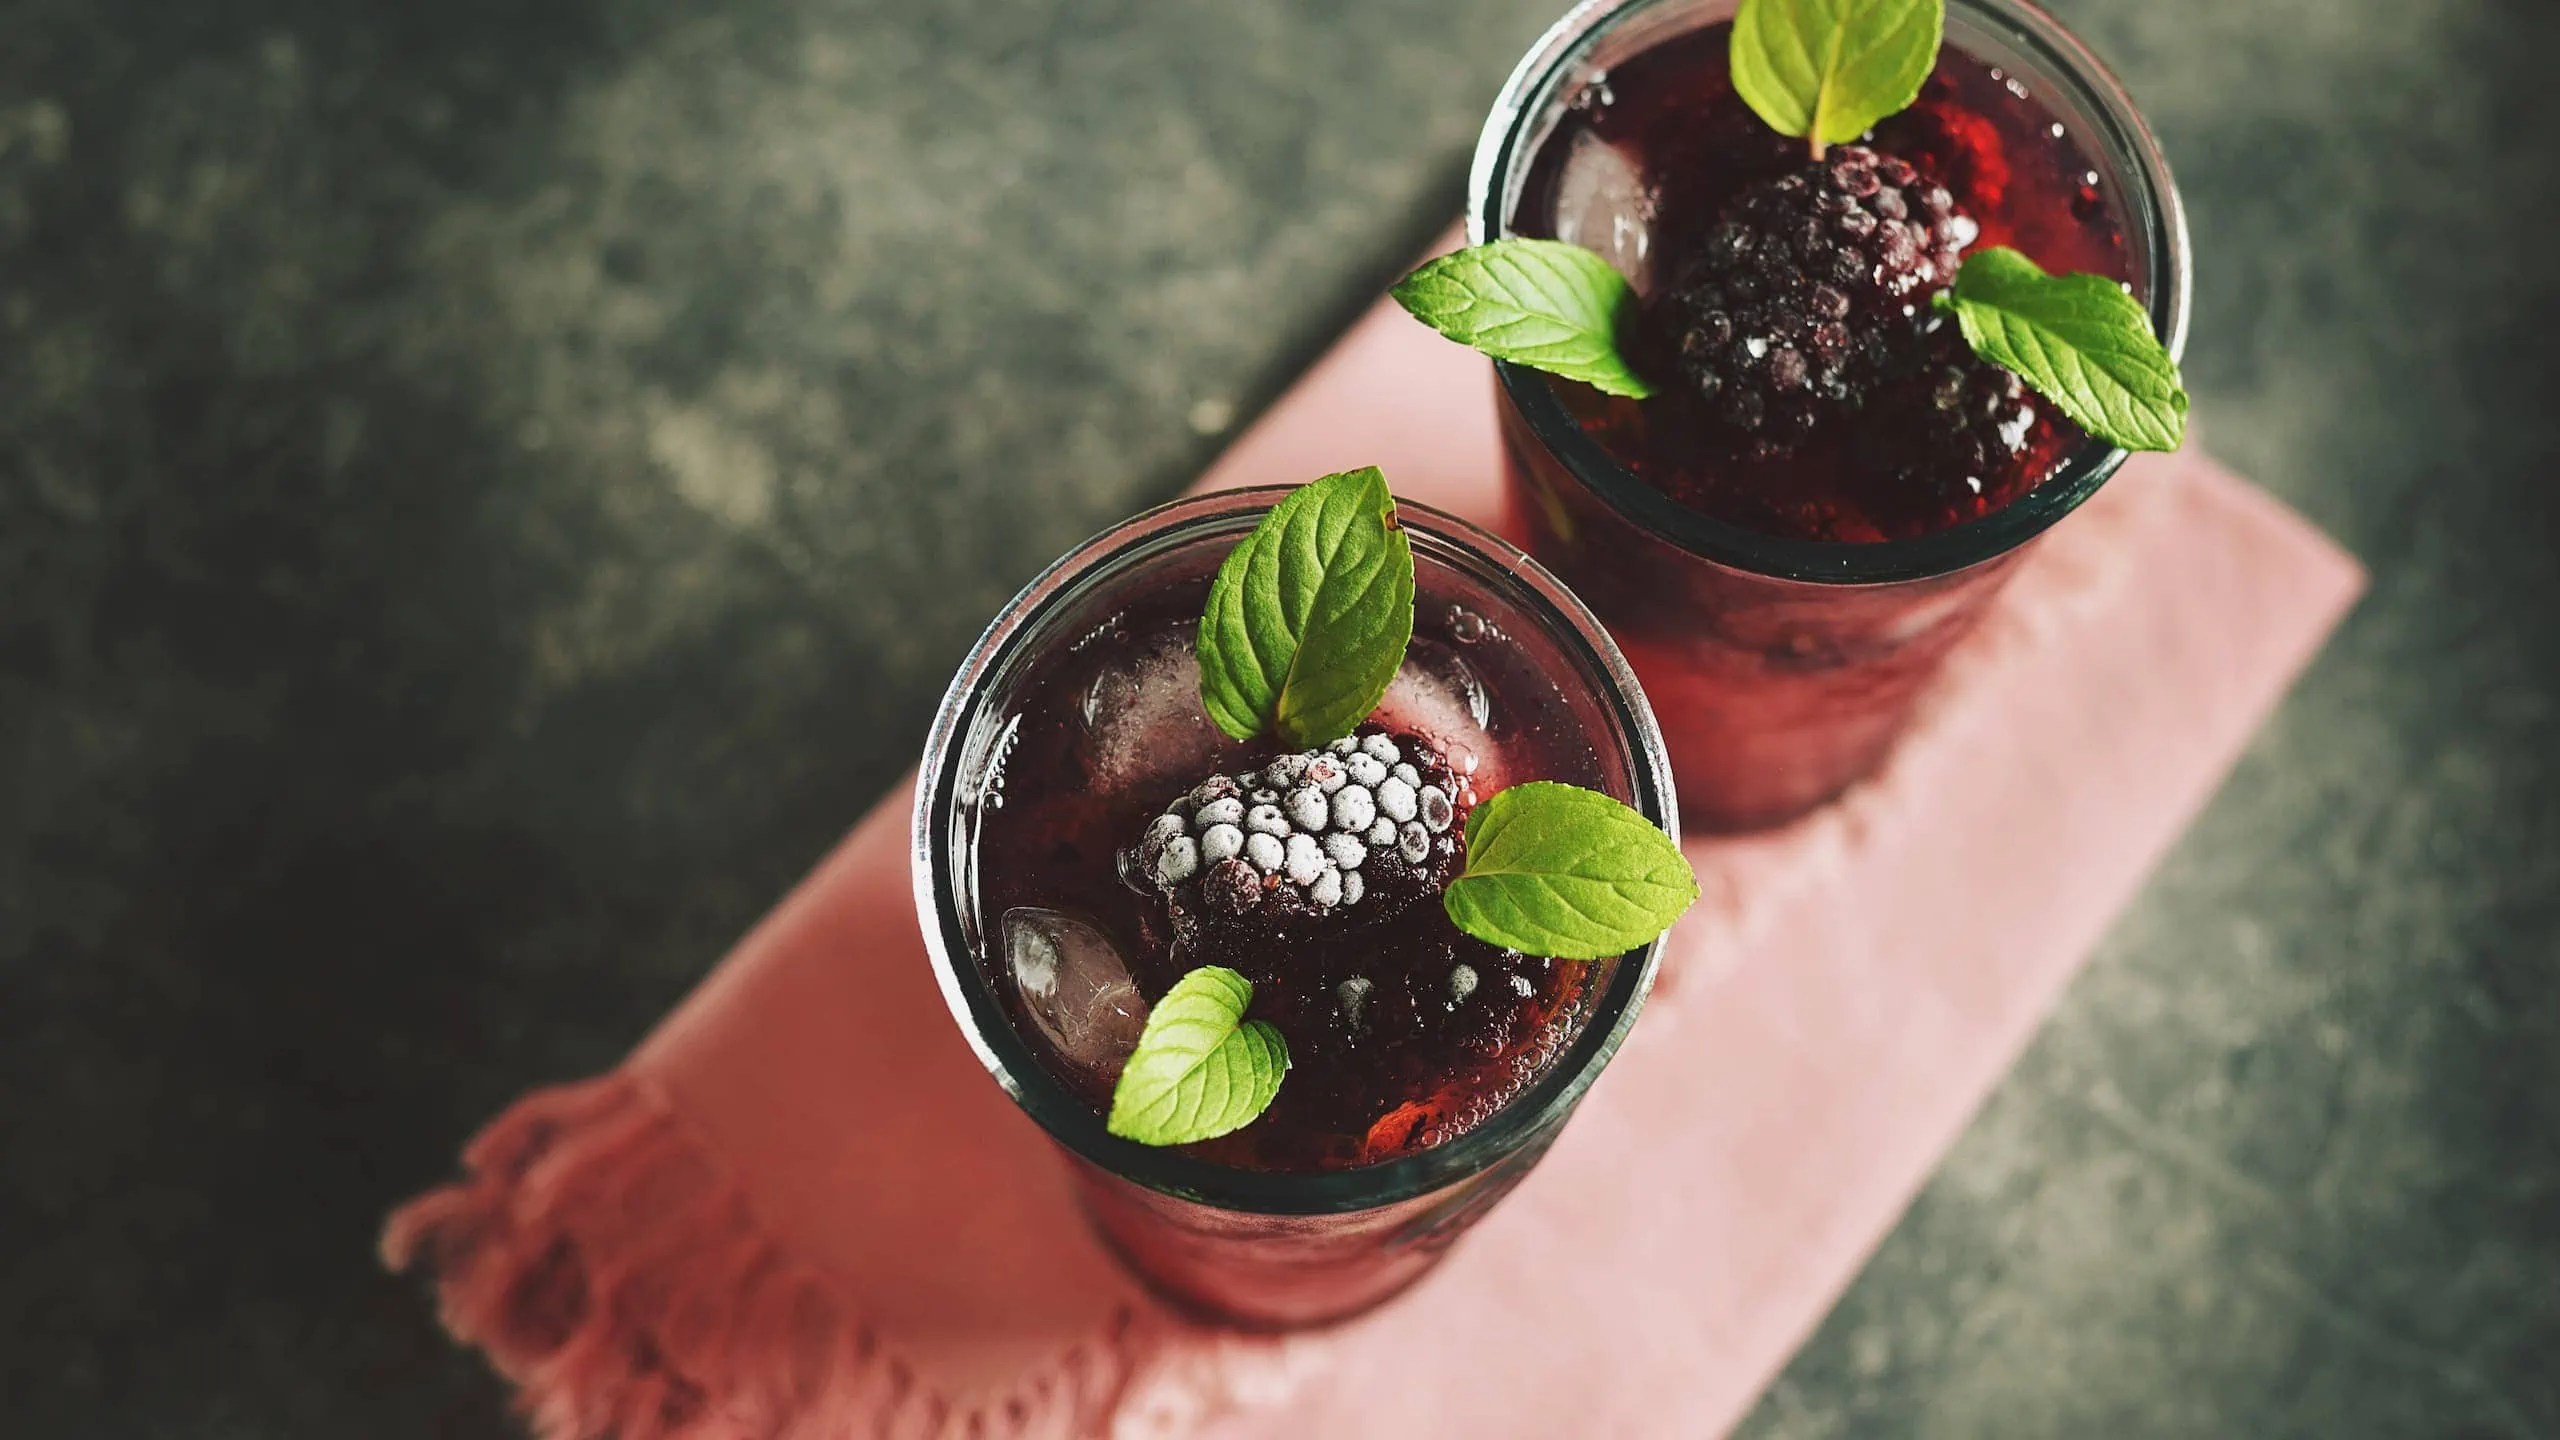 Homemade blackberry moonshine recipe garnished with mint